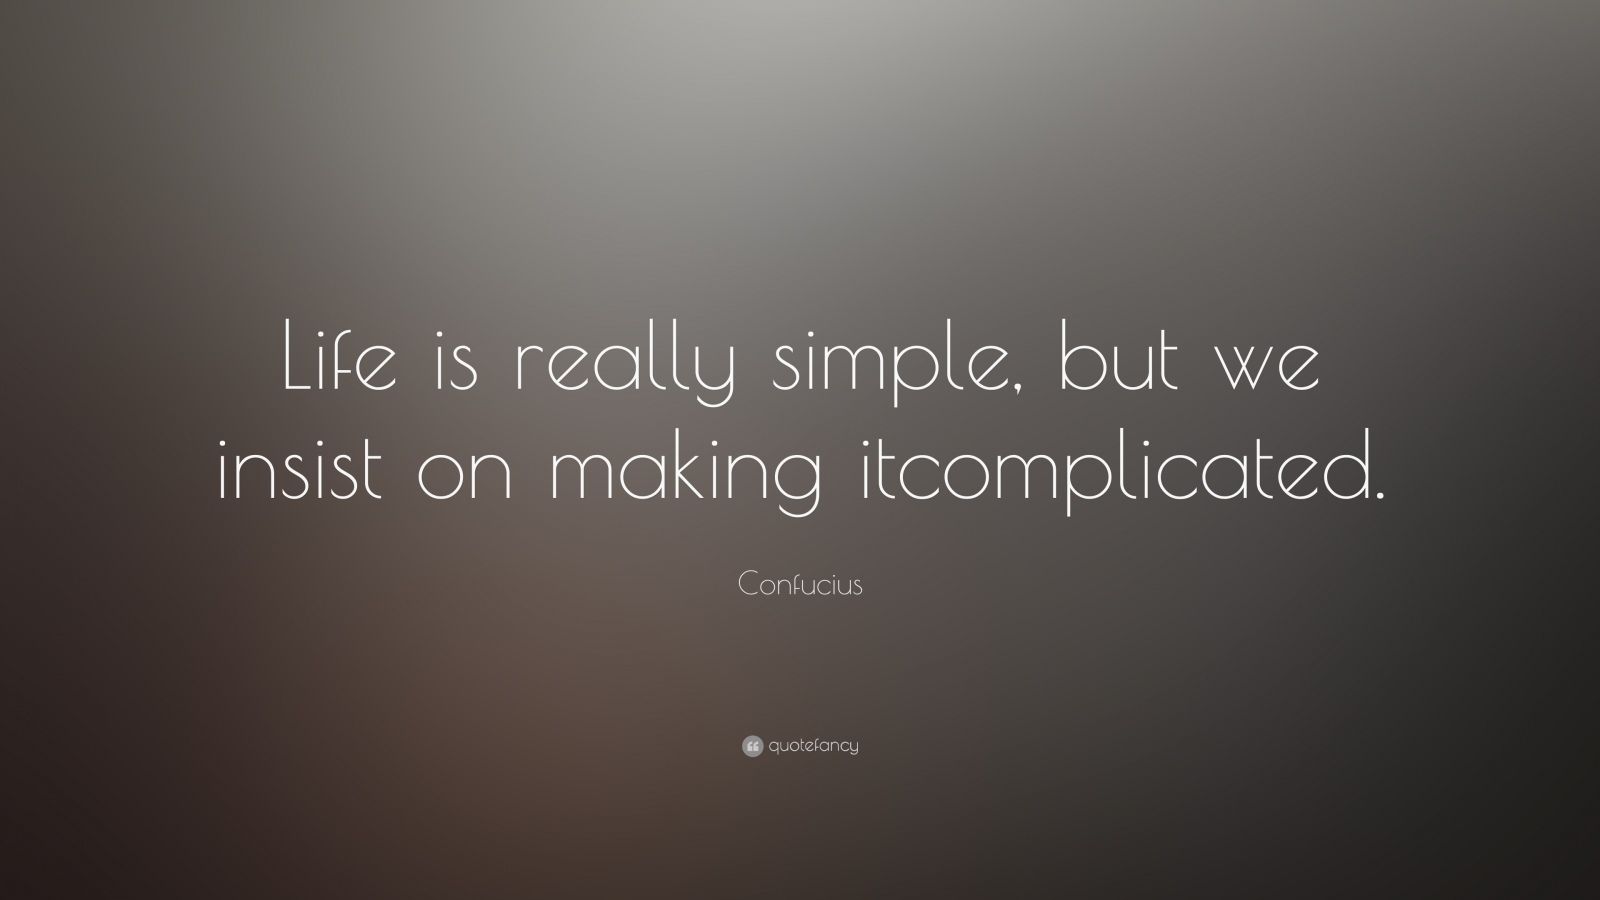 confucius quote life is really simple but we insist on making it complicated - Confucius Quotes